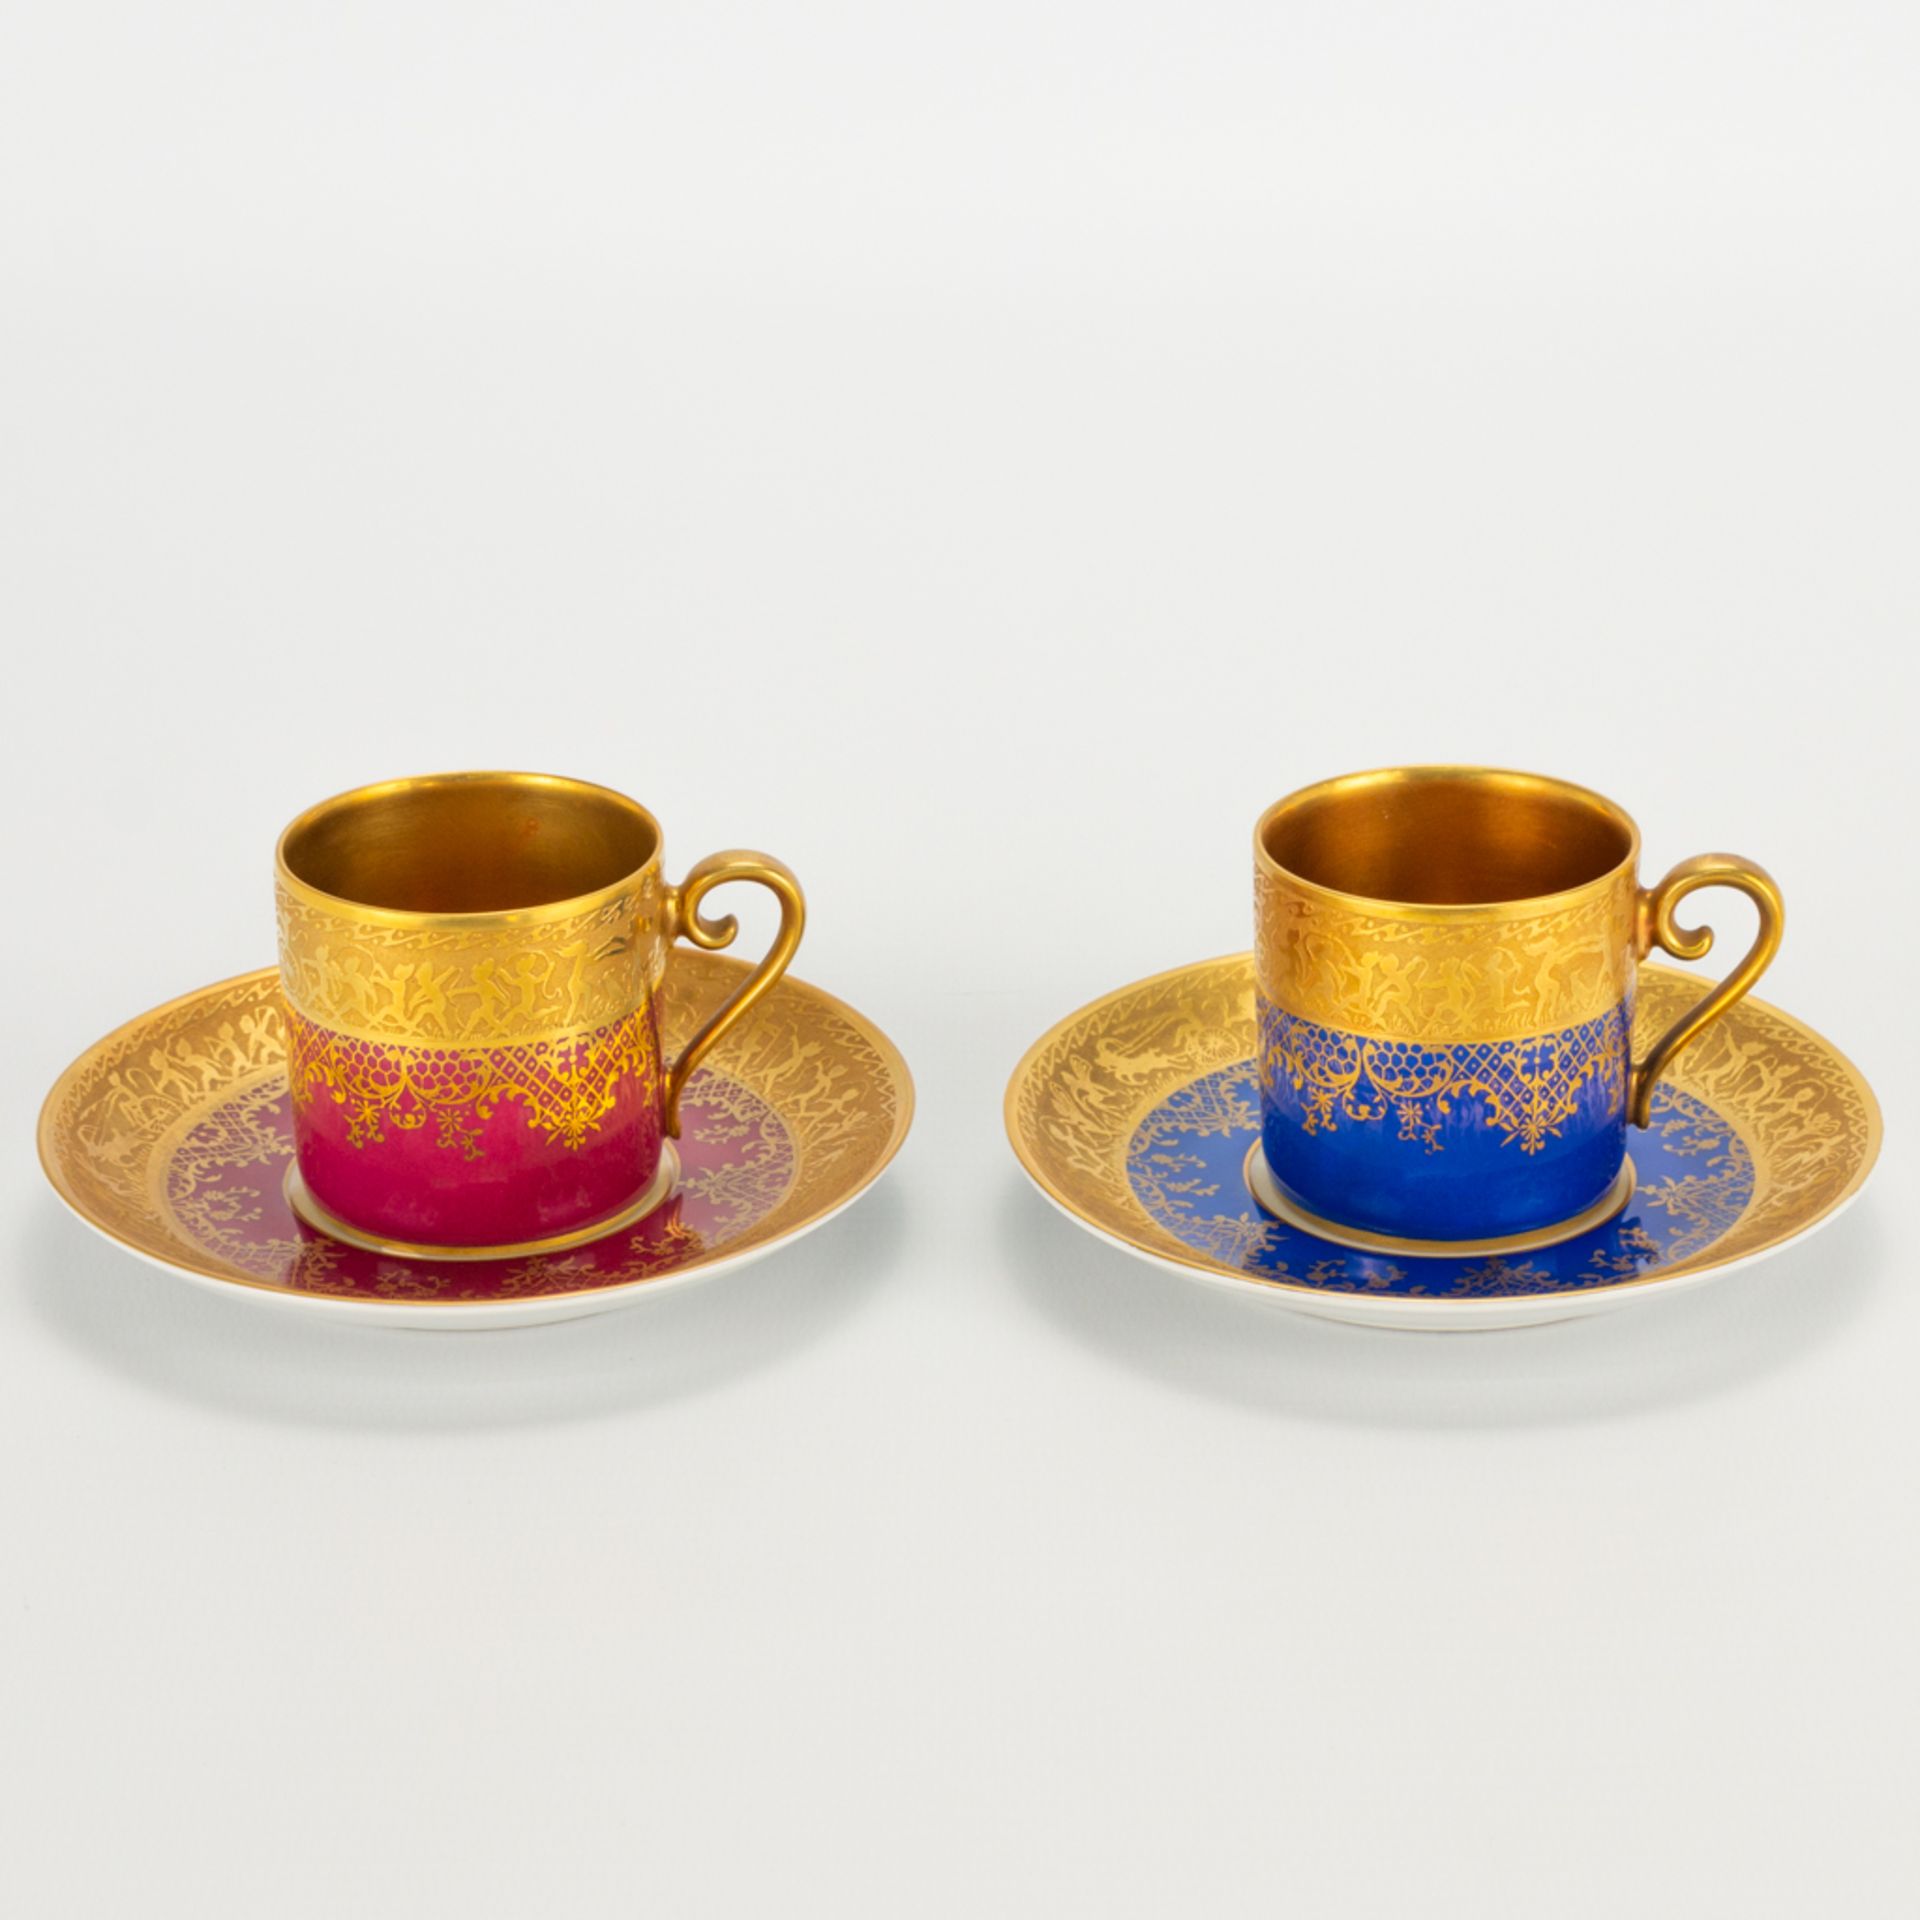 A collection of 2 coffee cups and saucers, made by Karlsbader Porzellan in Germany and inlayed with